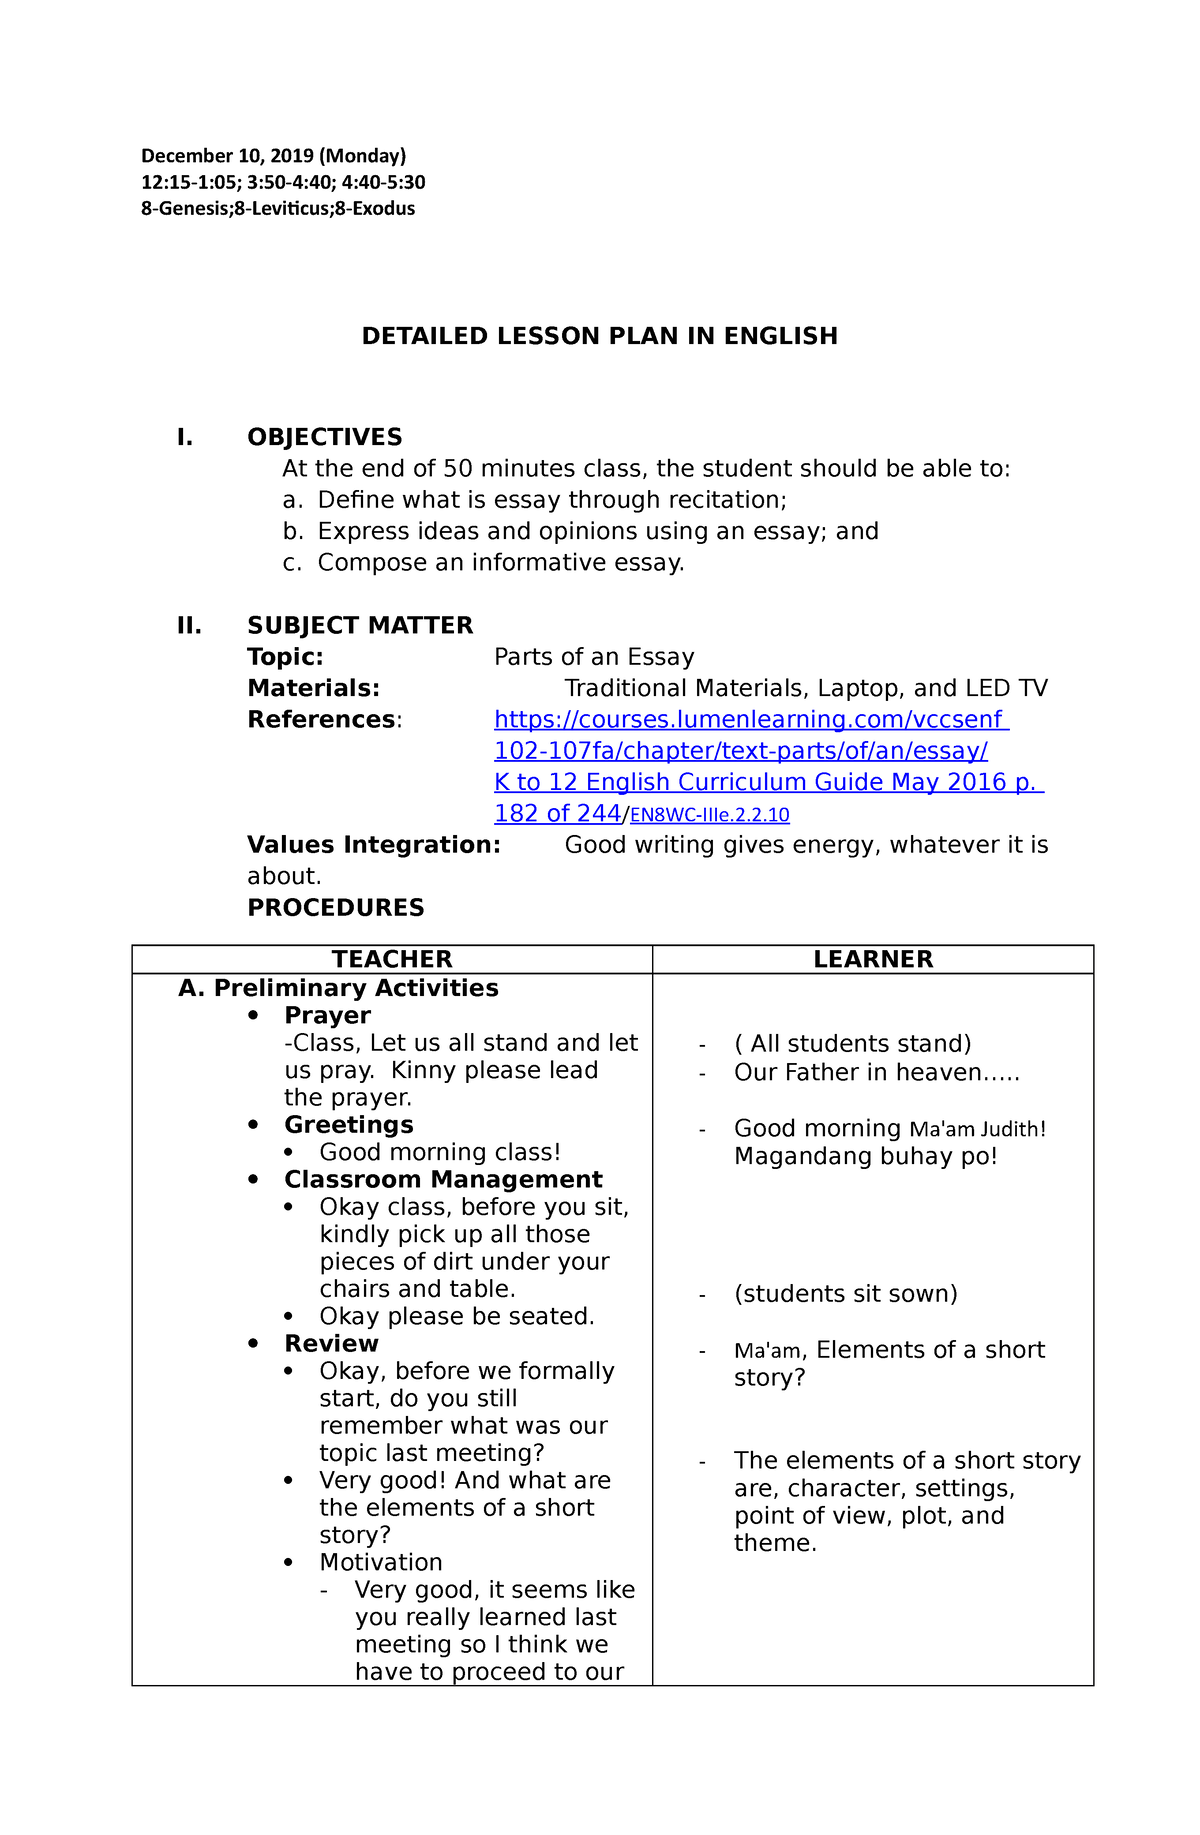 detailed lesson plan about informative essay